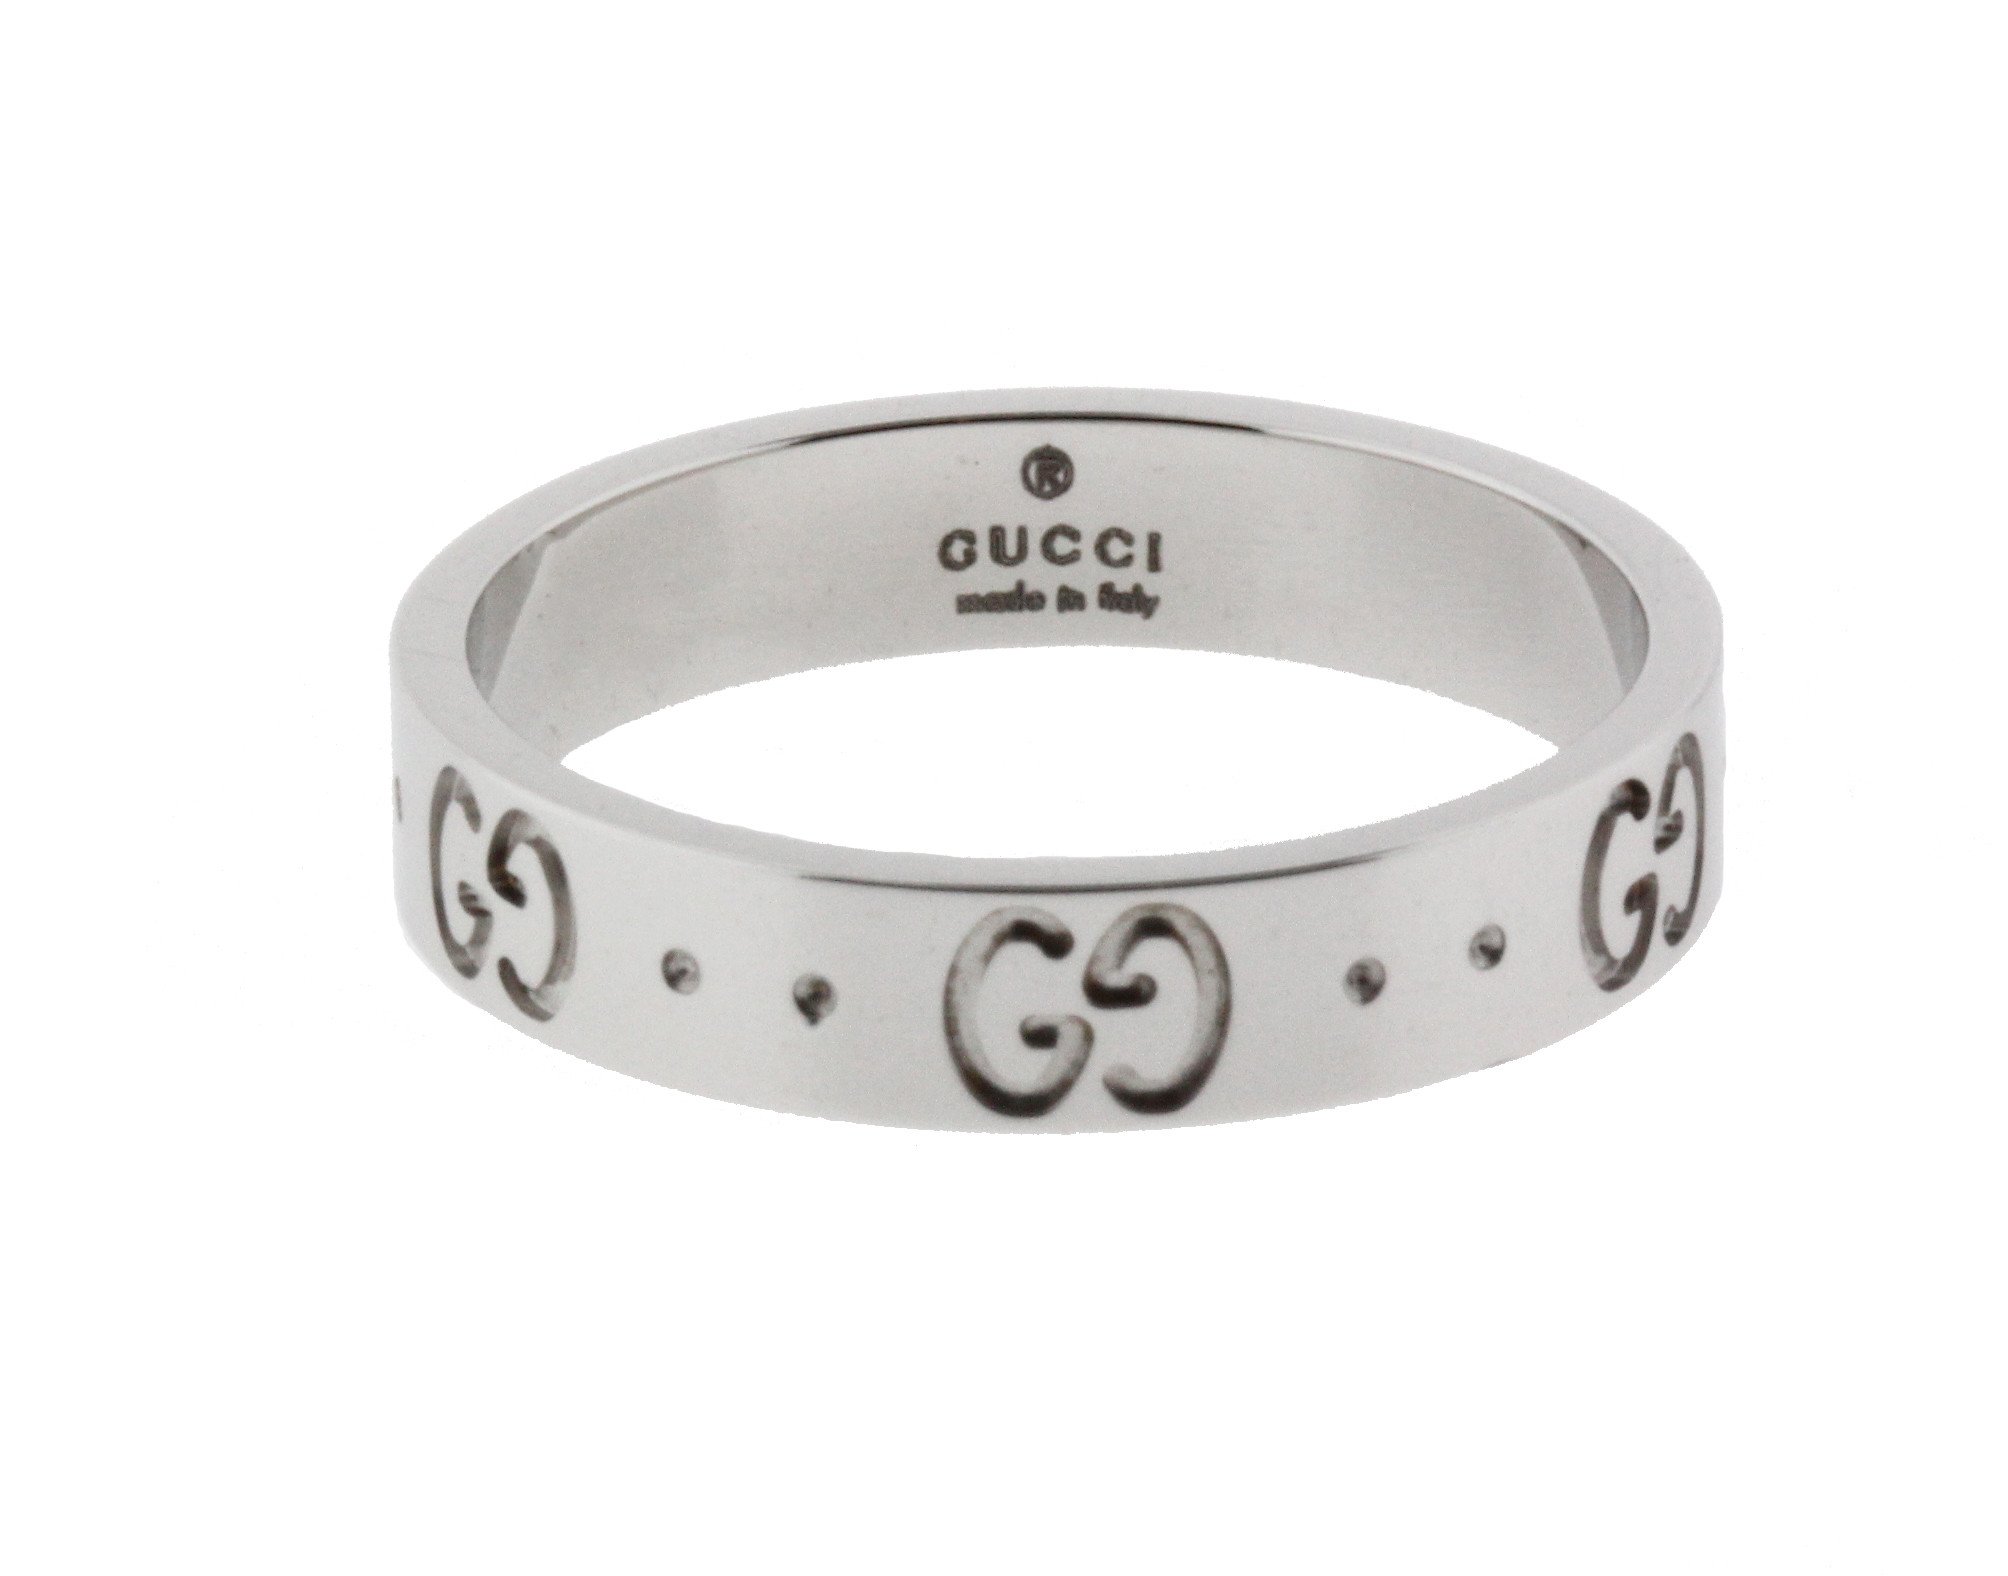 Gucci Icon thin band band ring in 18 karat white gold new in box size 6